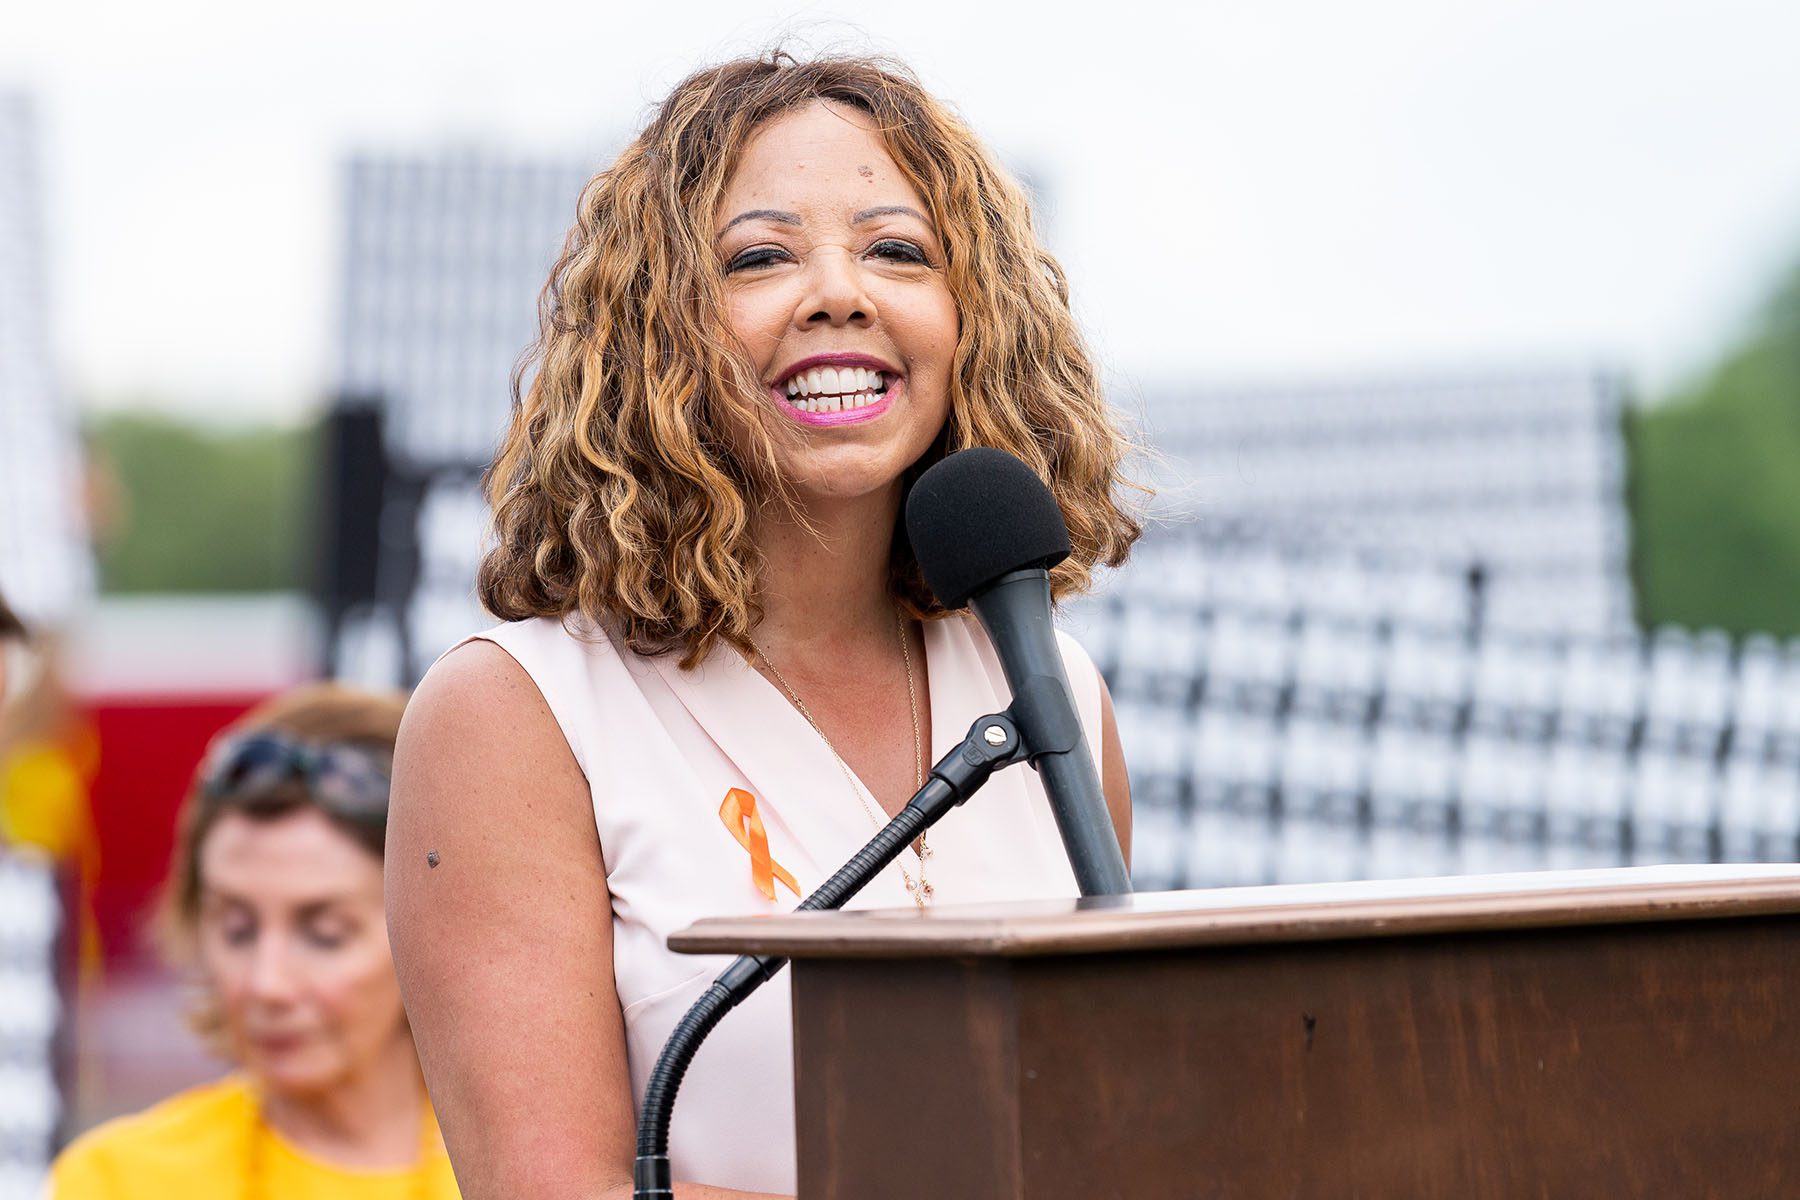 Lucy McBath smiles from a podium as she speaks.